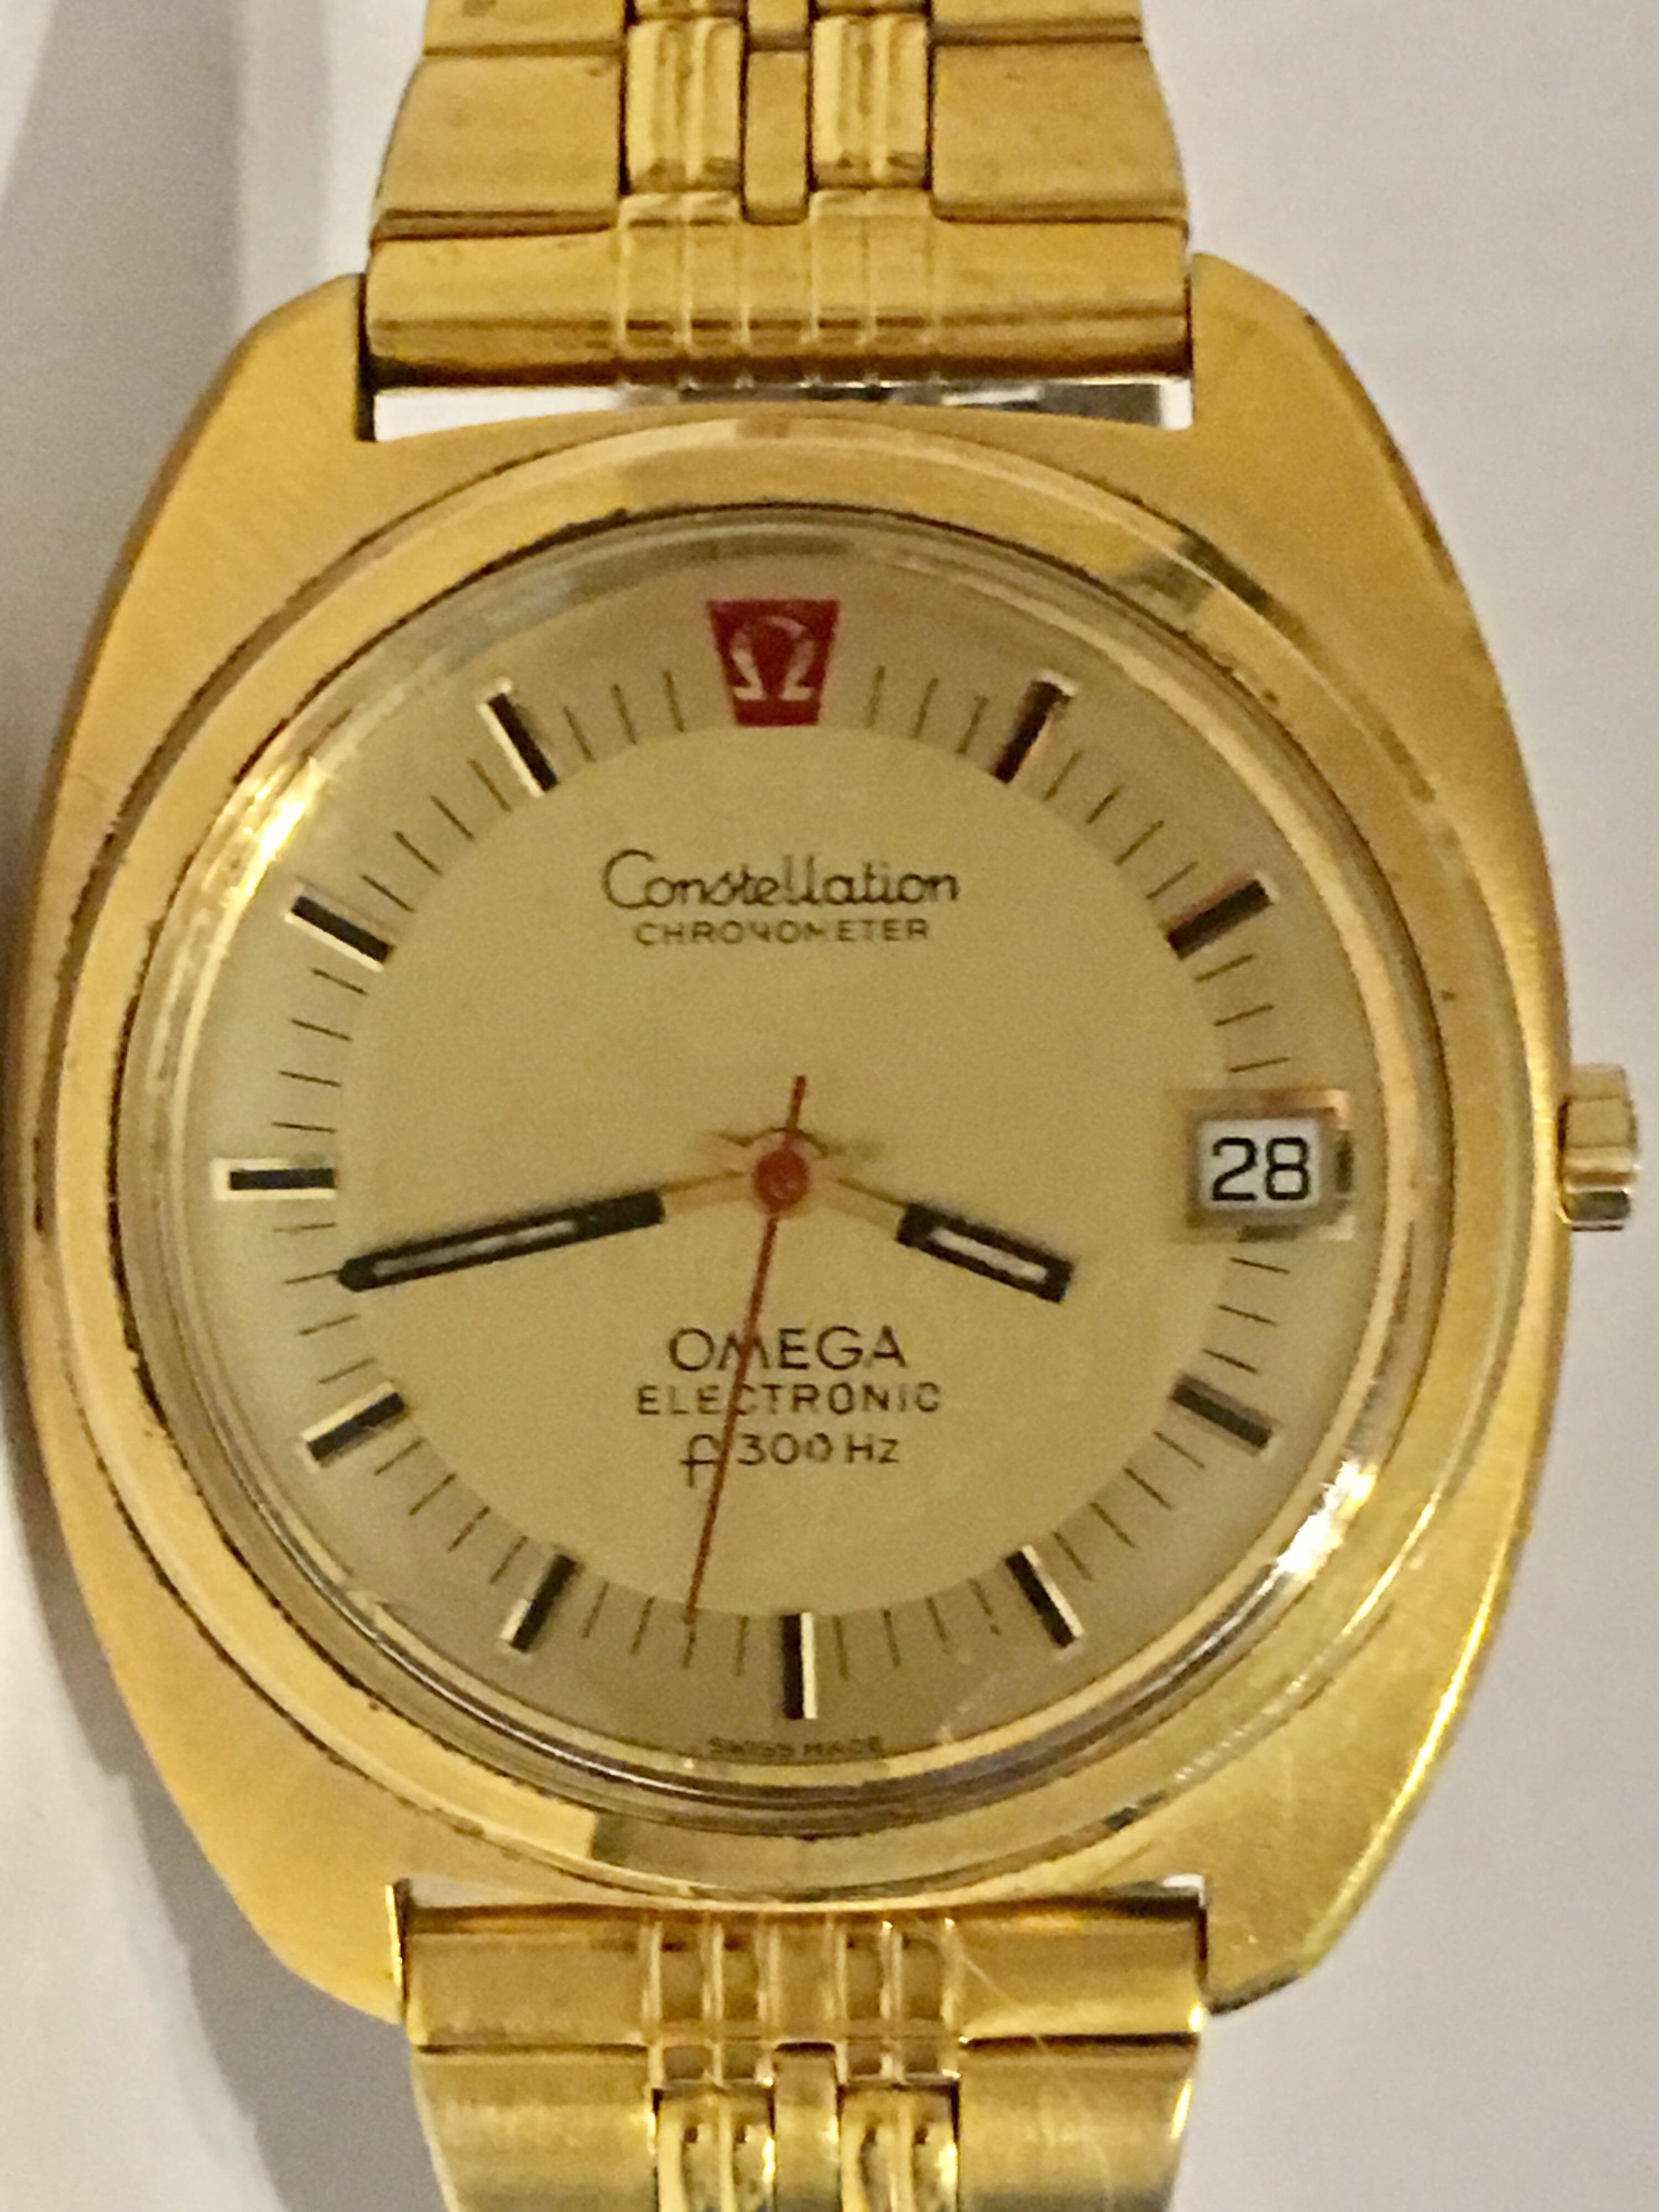 Vintage 1970s Omega Constellation F300HZ Gold-Plated Electronic Watch 3